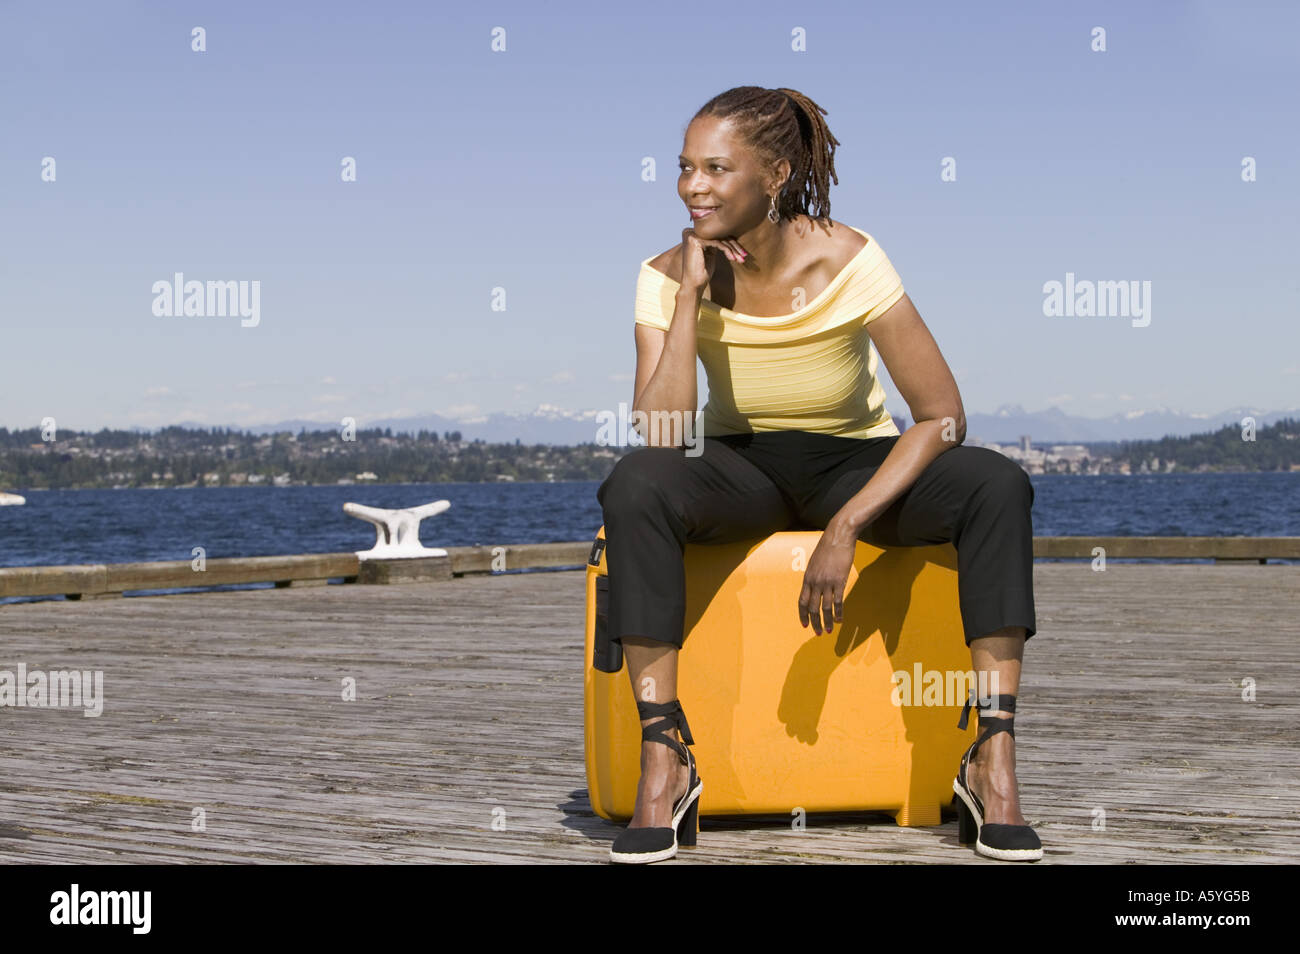 Woman outdoors sitting on suitcase Stock Photo